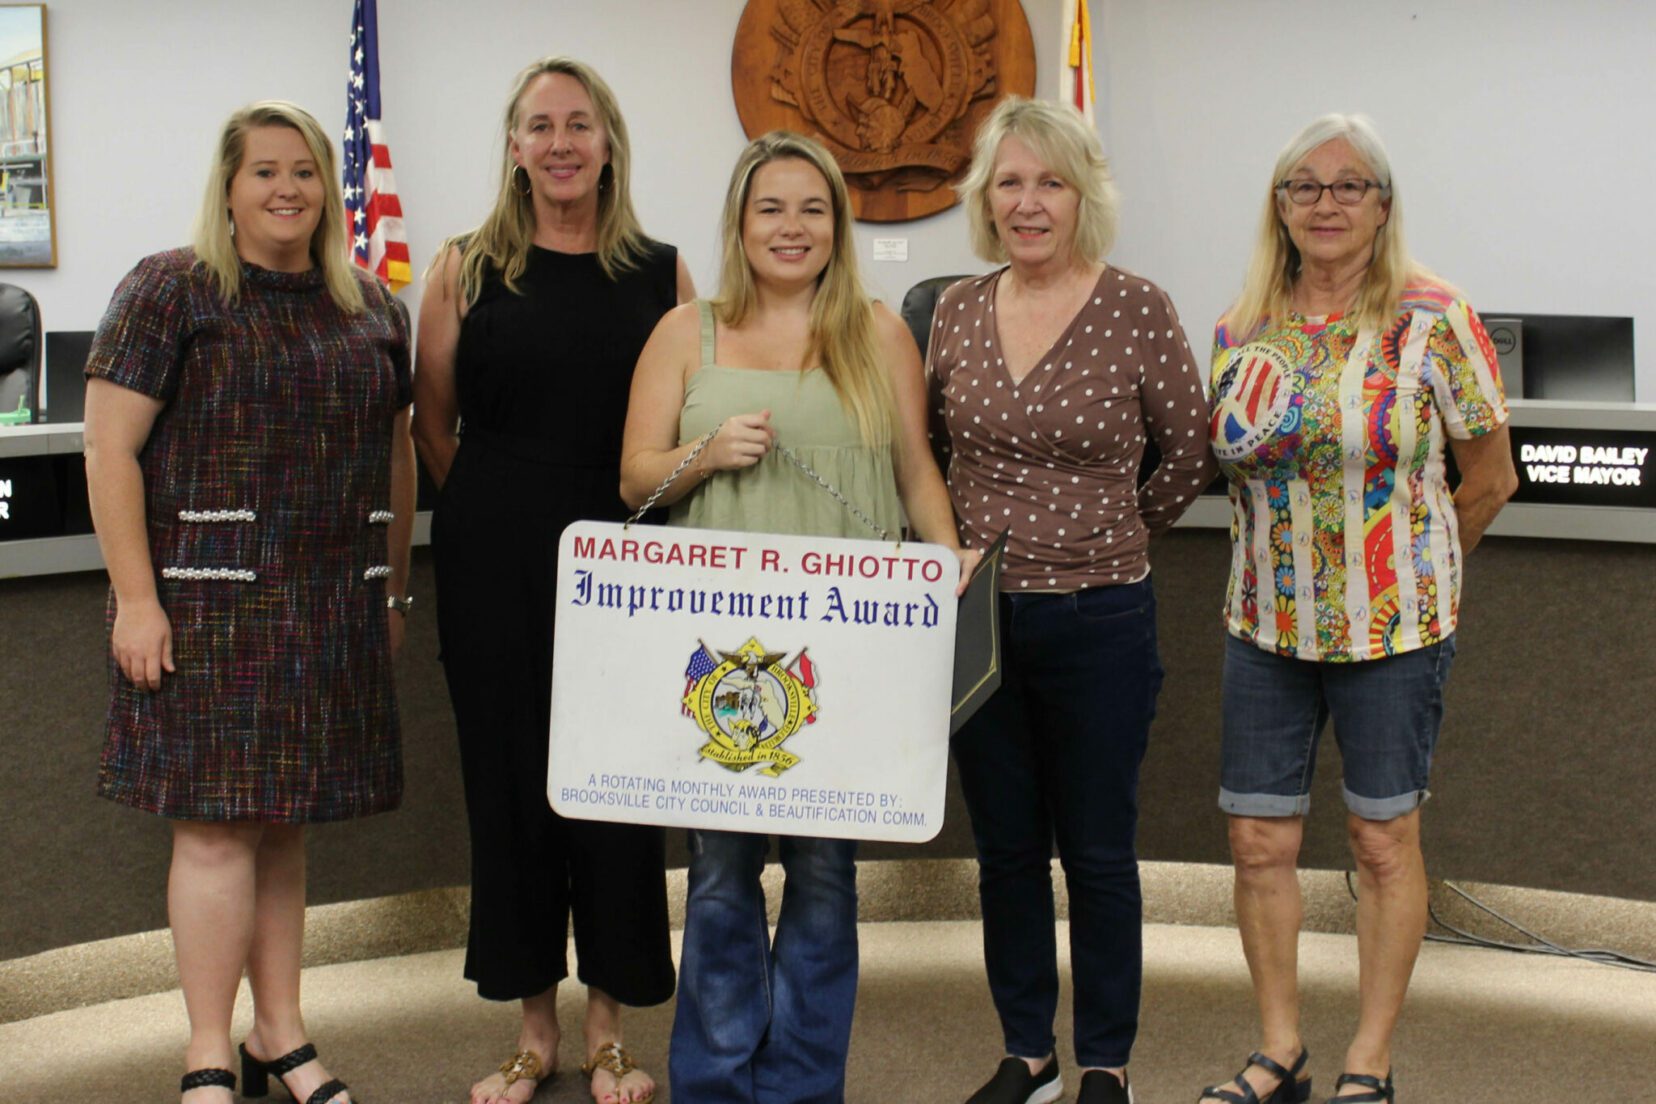 Commercial Improvement Award: L to R: Councilwoman Christa Tanner, Beautification Board Members Lisa Steinkamp, Kathy Middleton (Chair) and Cindy Gandy.